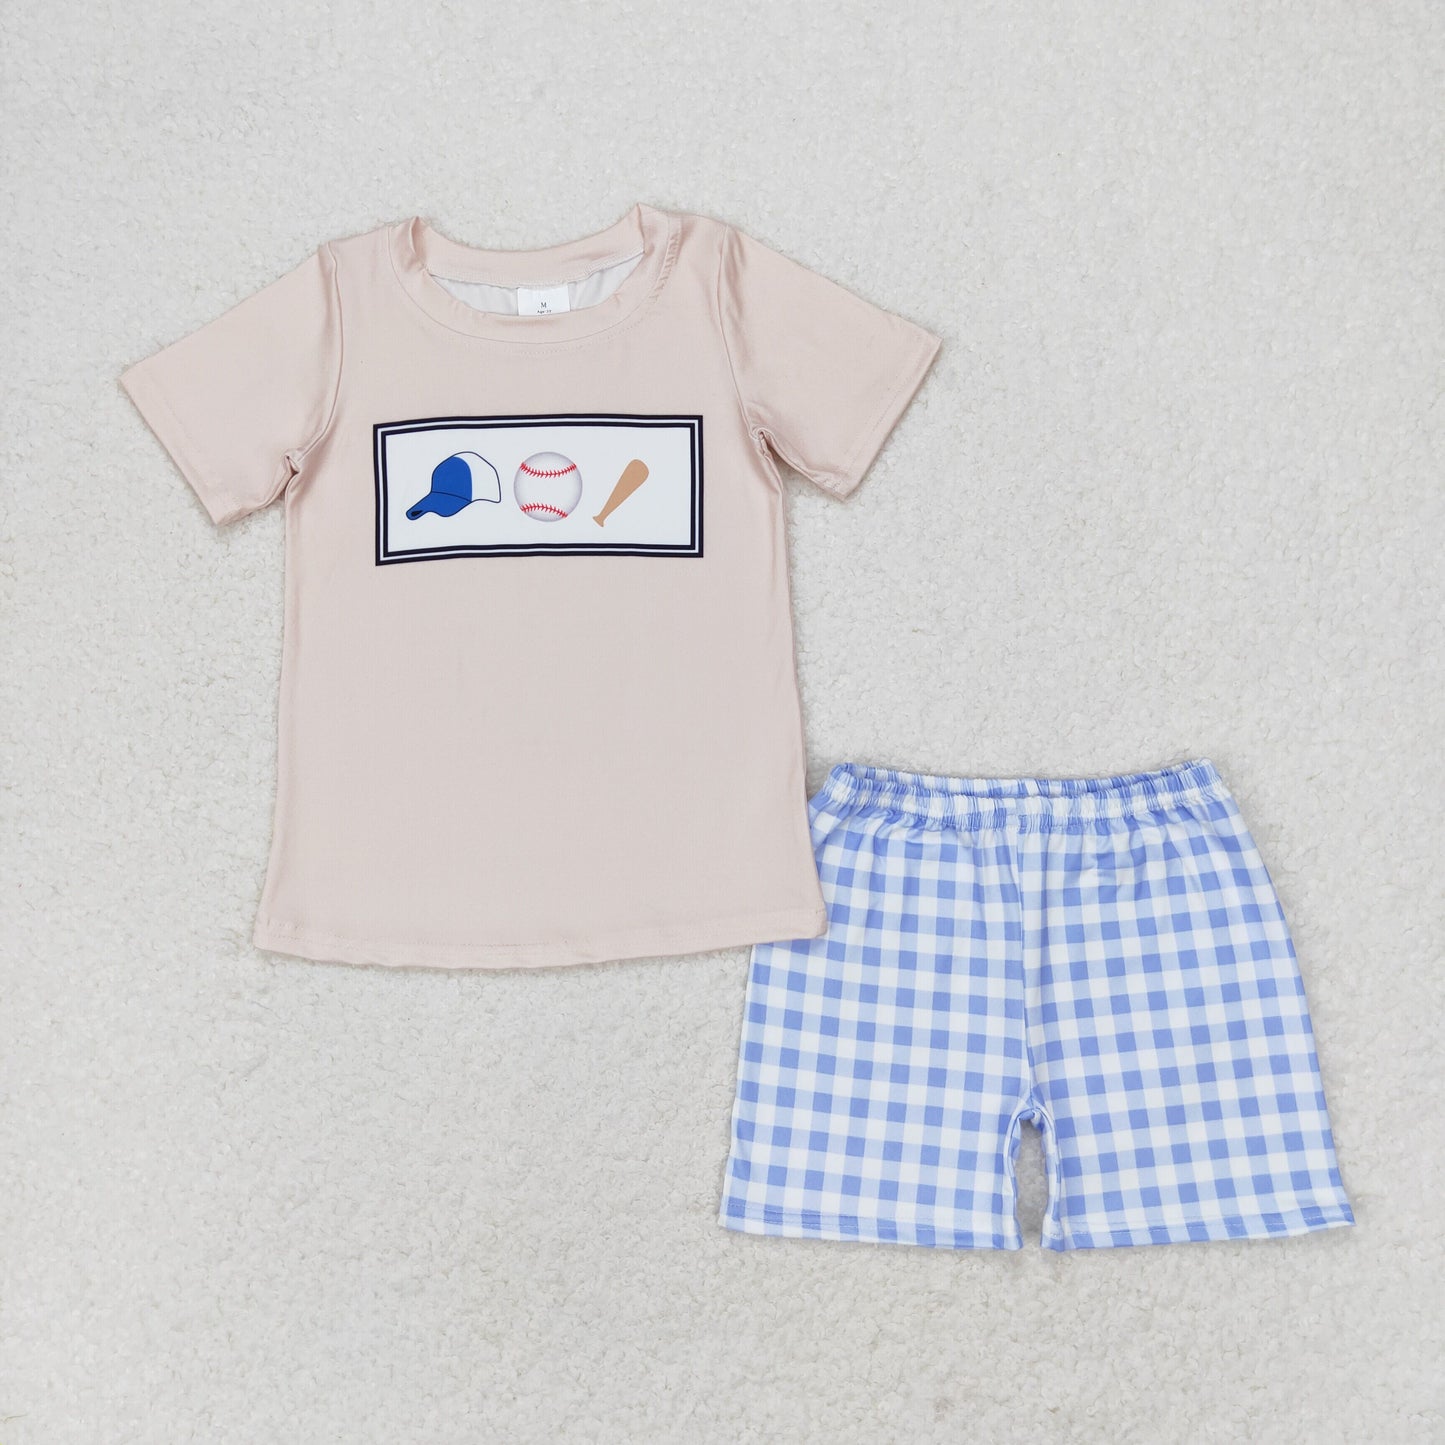 BSSO0919 Kids boys summer clothes short sleeve top with shorts set